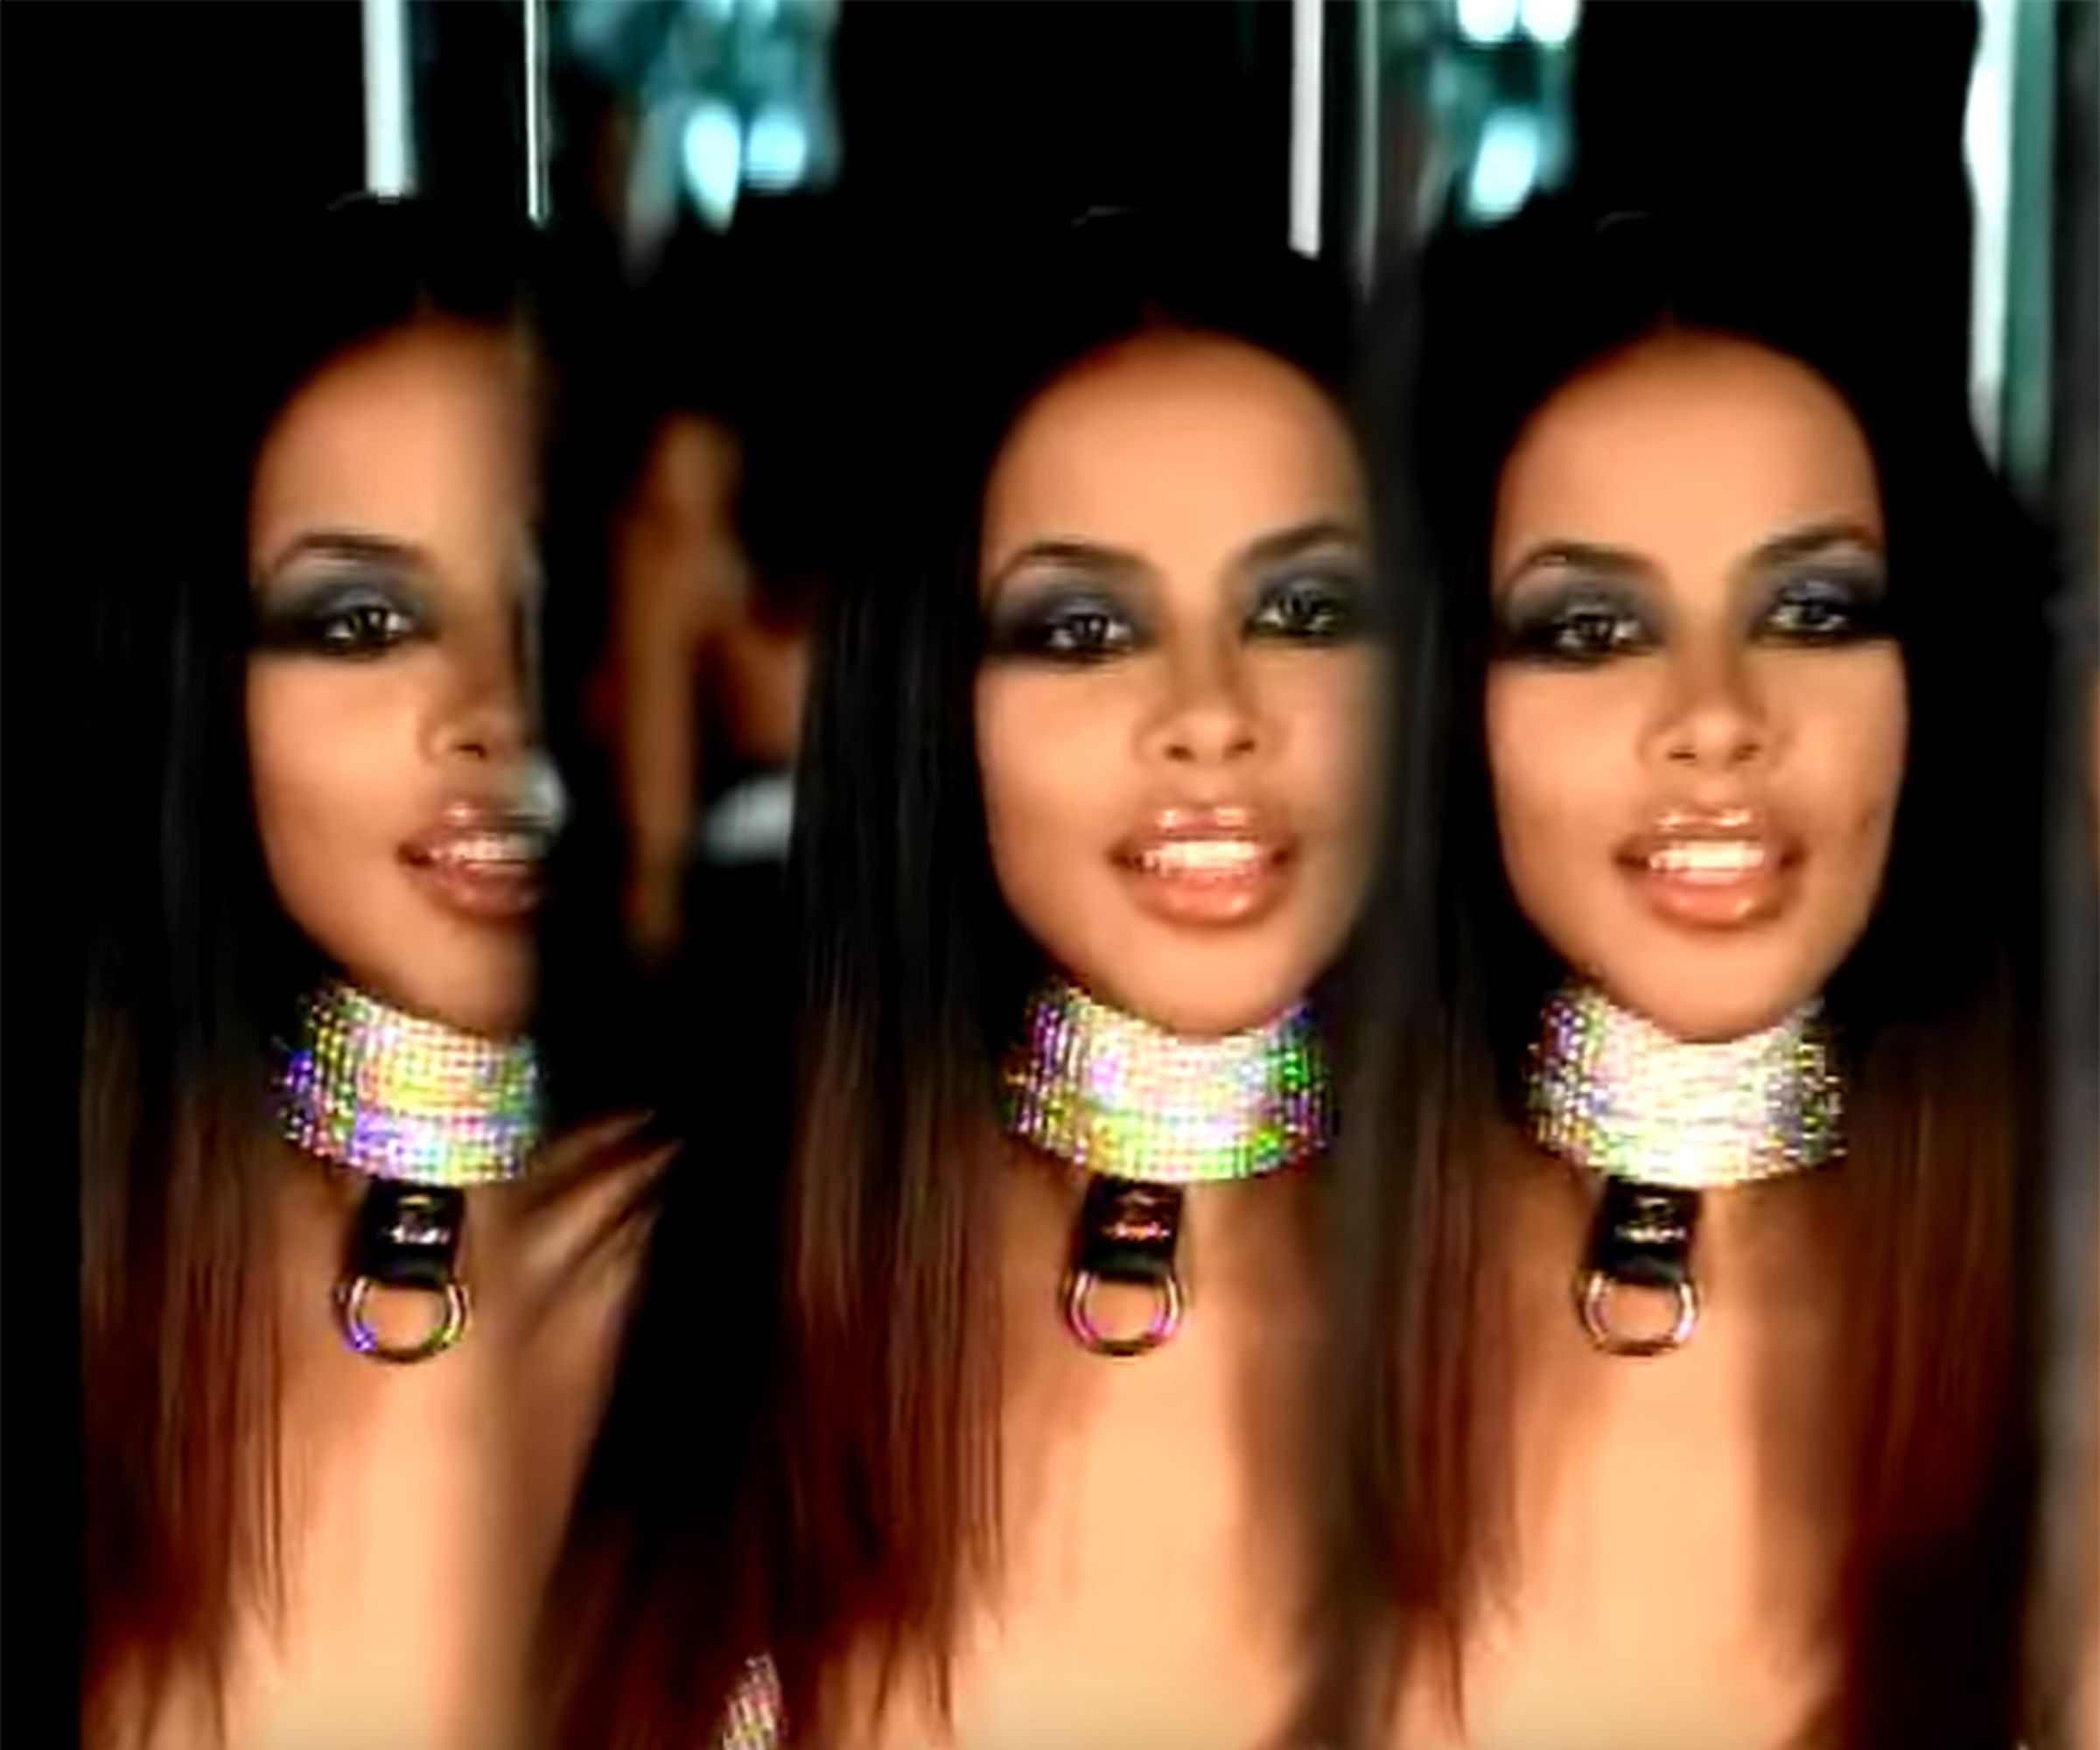 5 of aaliyah’s most iconic beauty looks